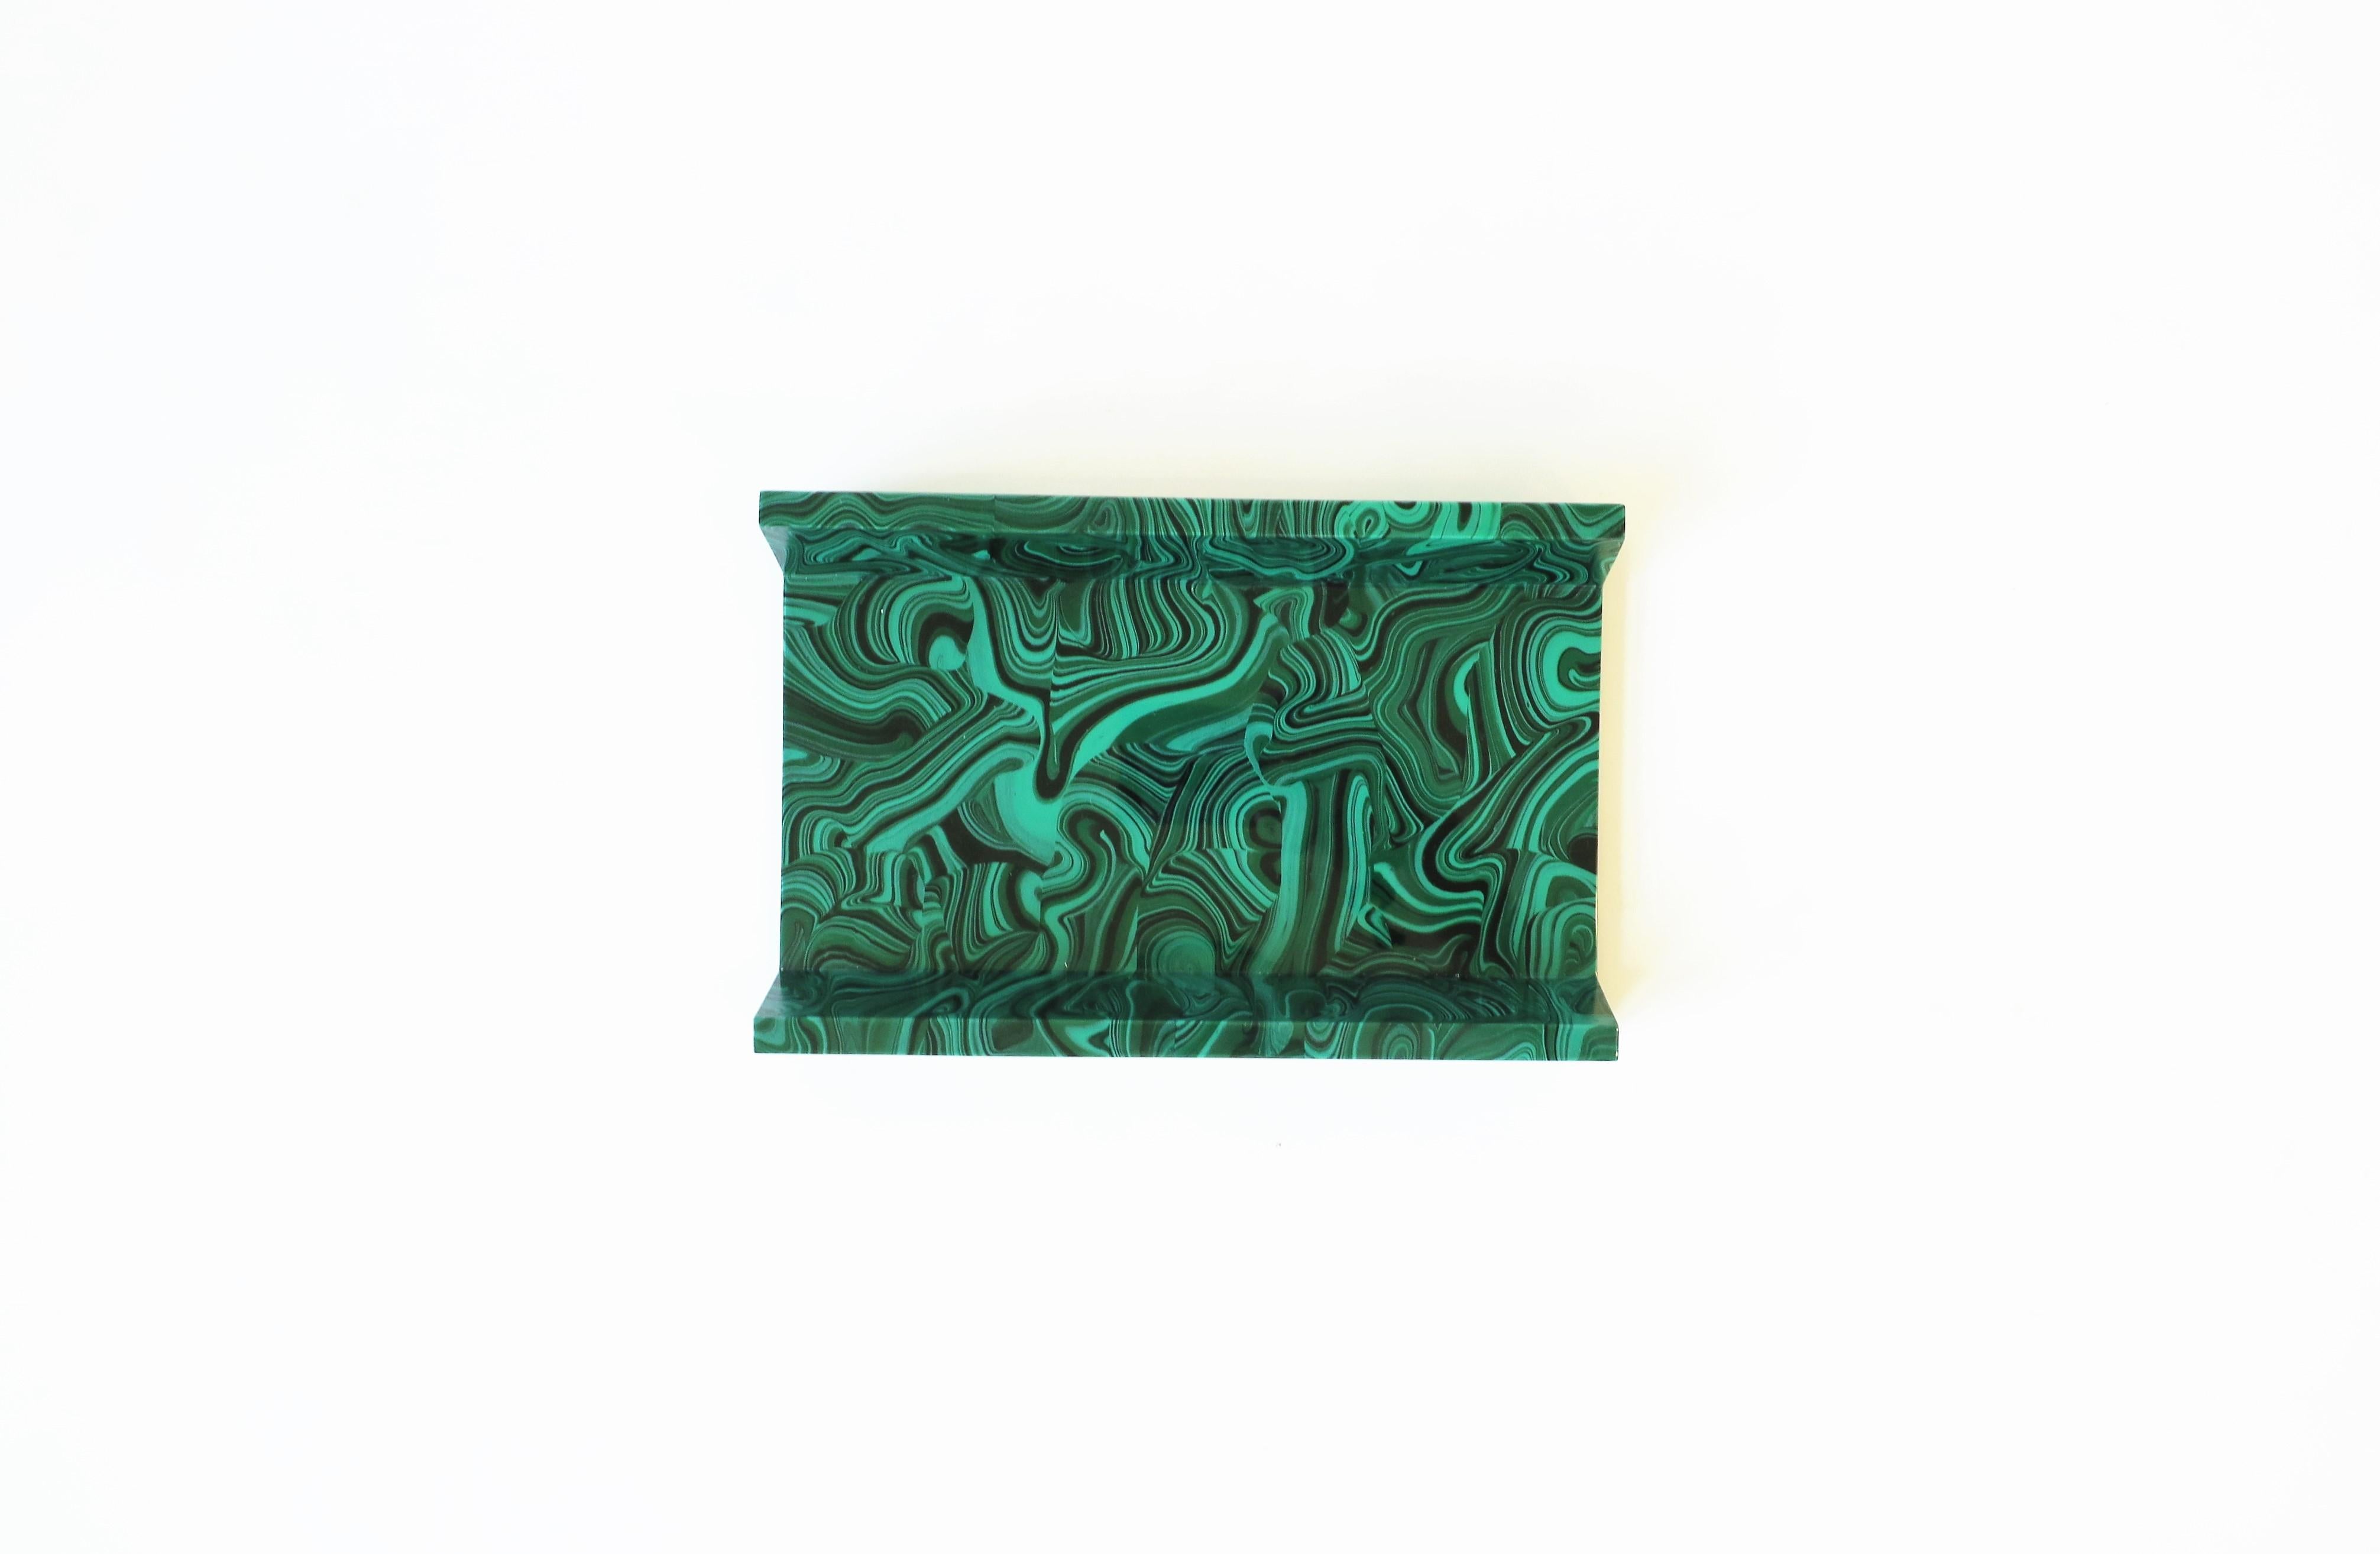 A striking green malachite style resin paper napkin or hand-towel holder, circa Late-20th century. A convenient piece for a vanity/bathroom area, etc. Piece measures: 5.25